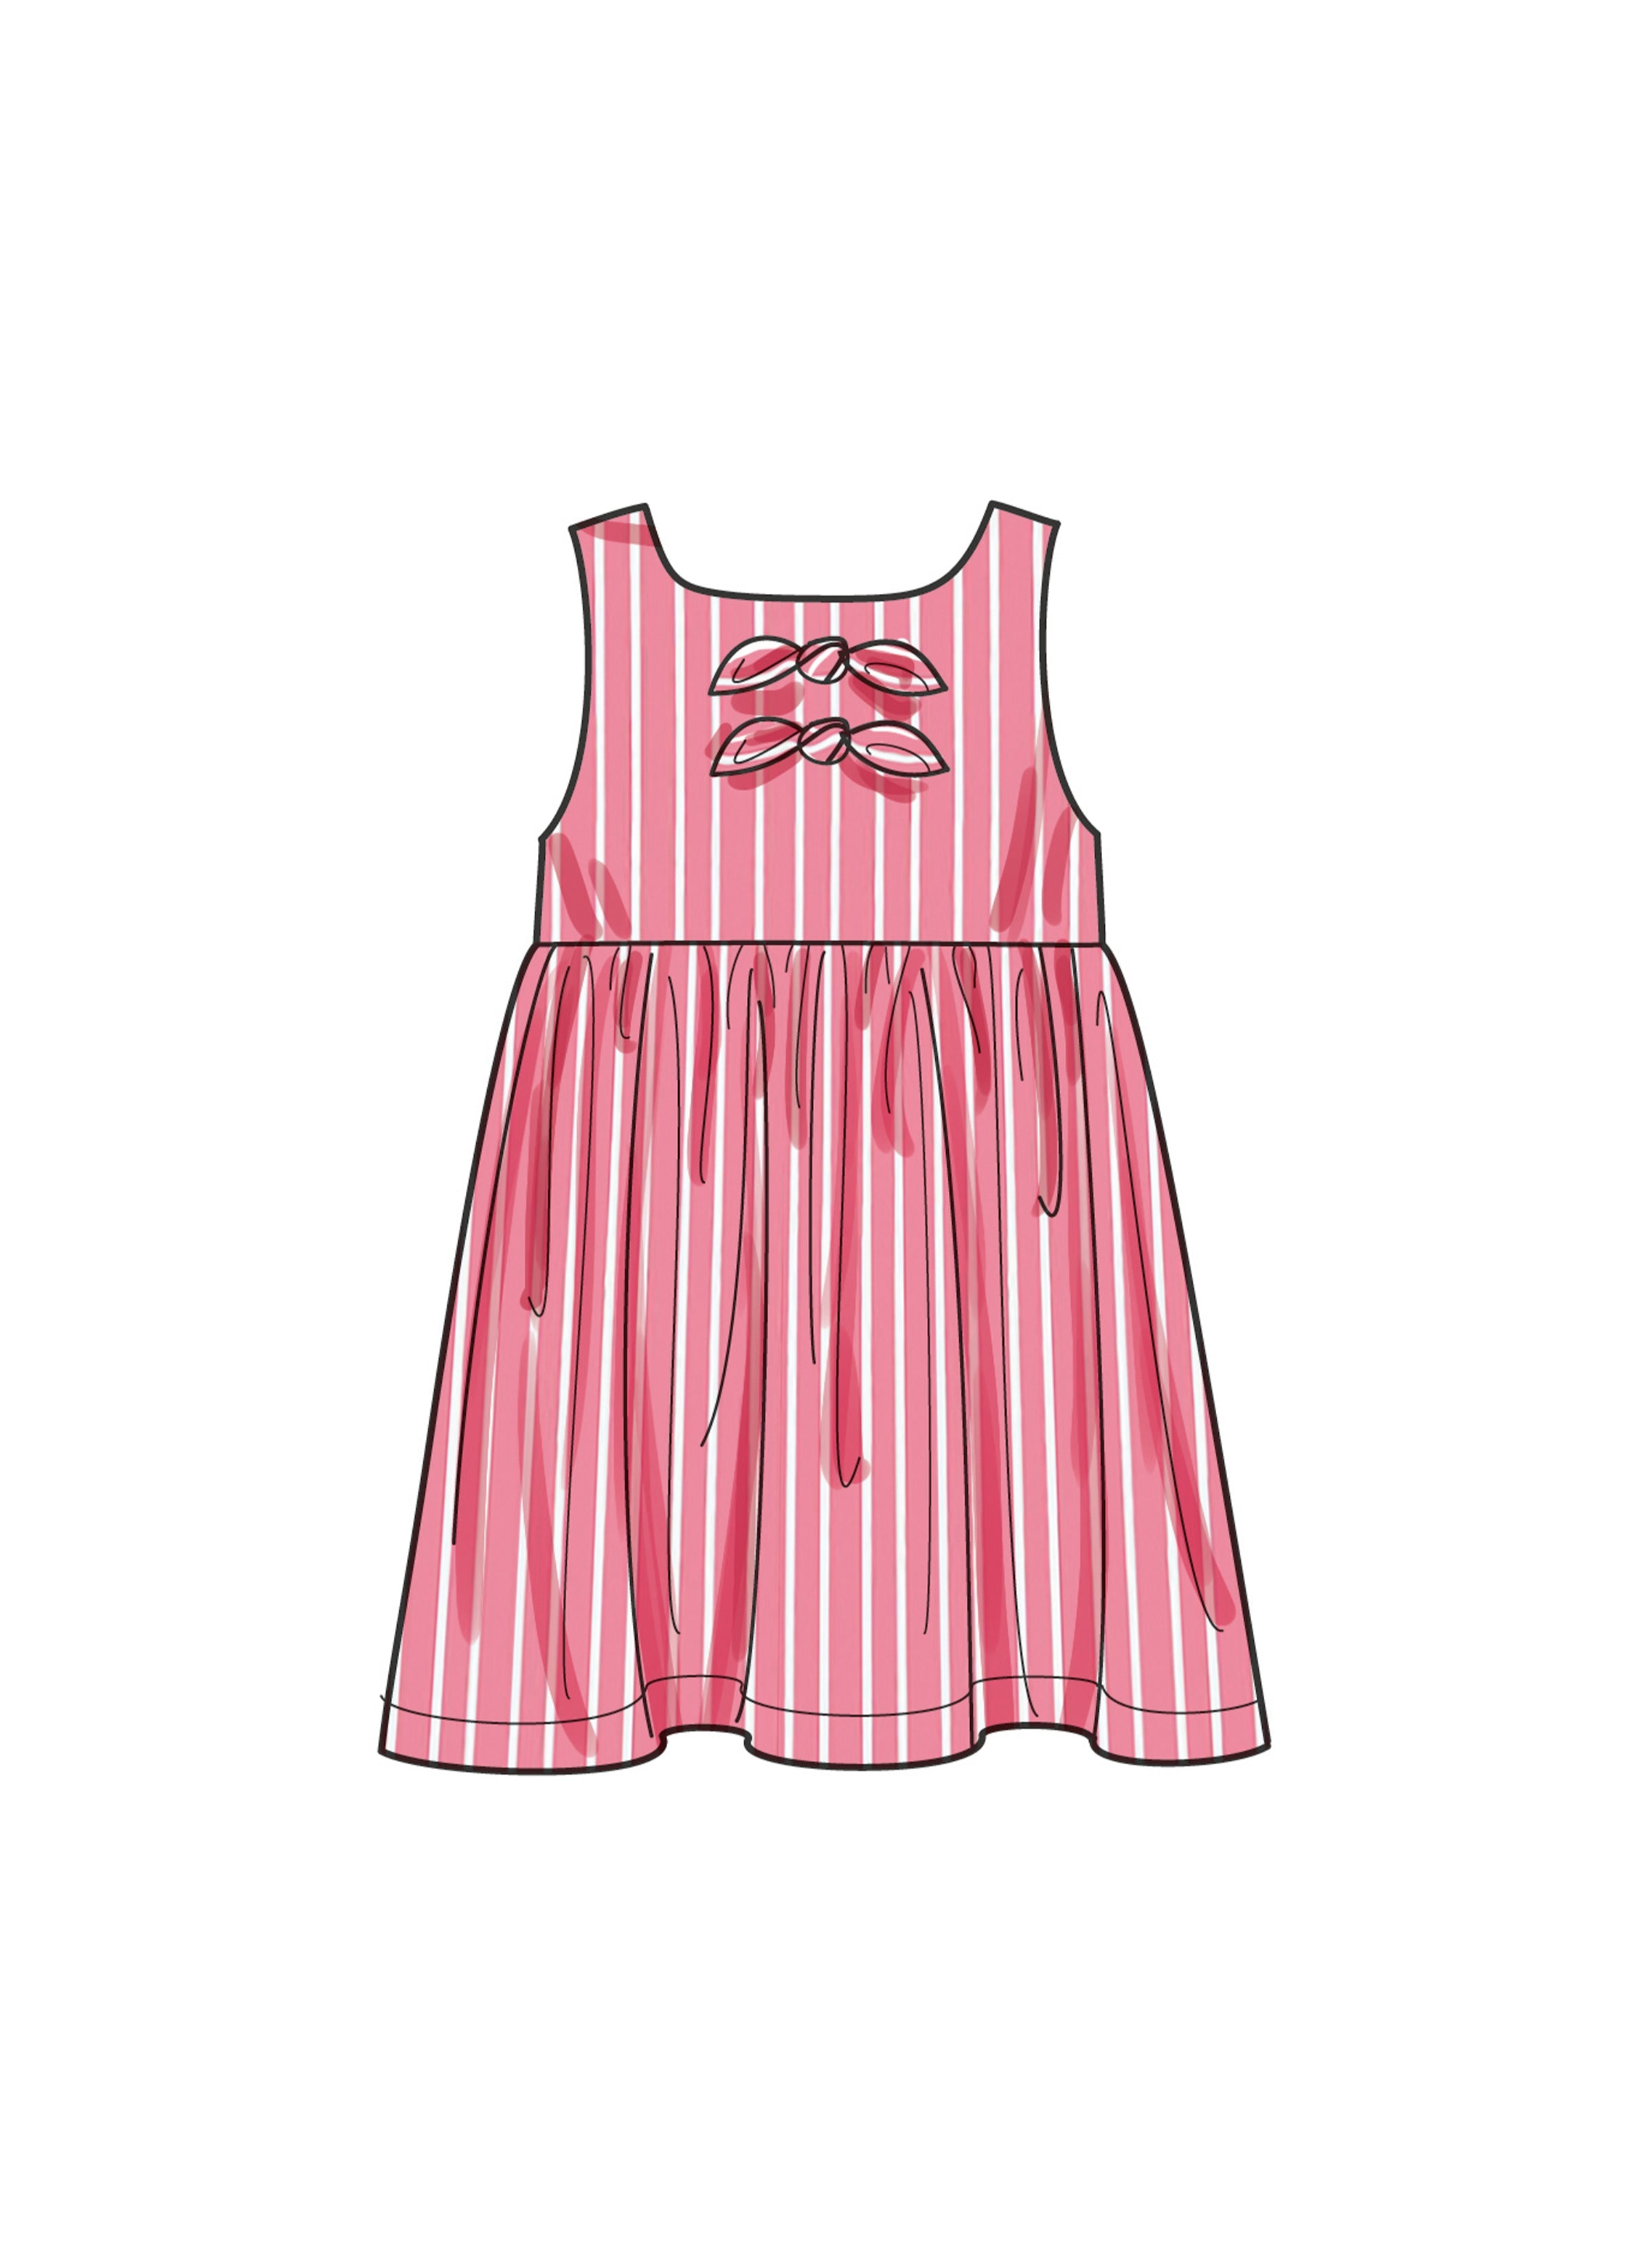 Simplicity Sewing Pattern 9932 Toddlers' Dress, Top and Pants from Jaycotts Sewing Supplies